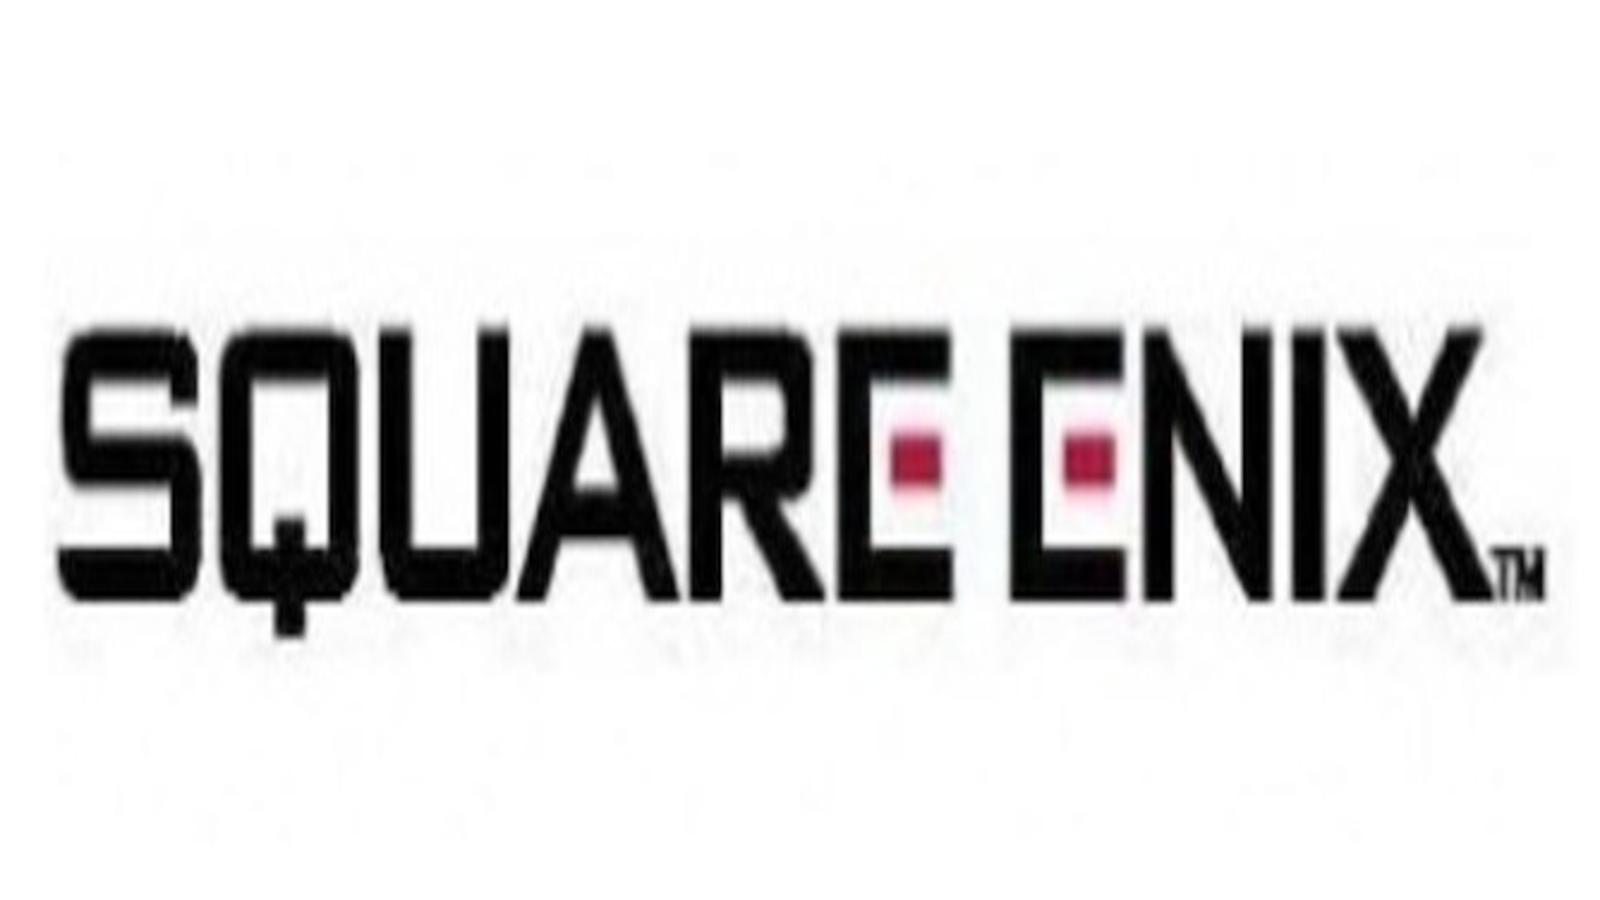 Europe, These Are Your Square Enix Masterpieces - Siliconera